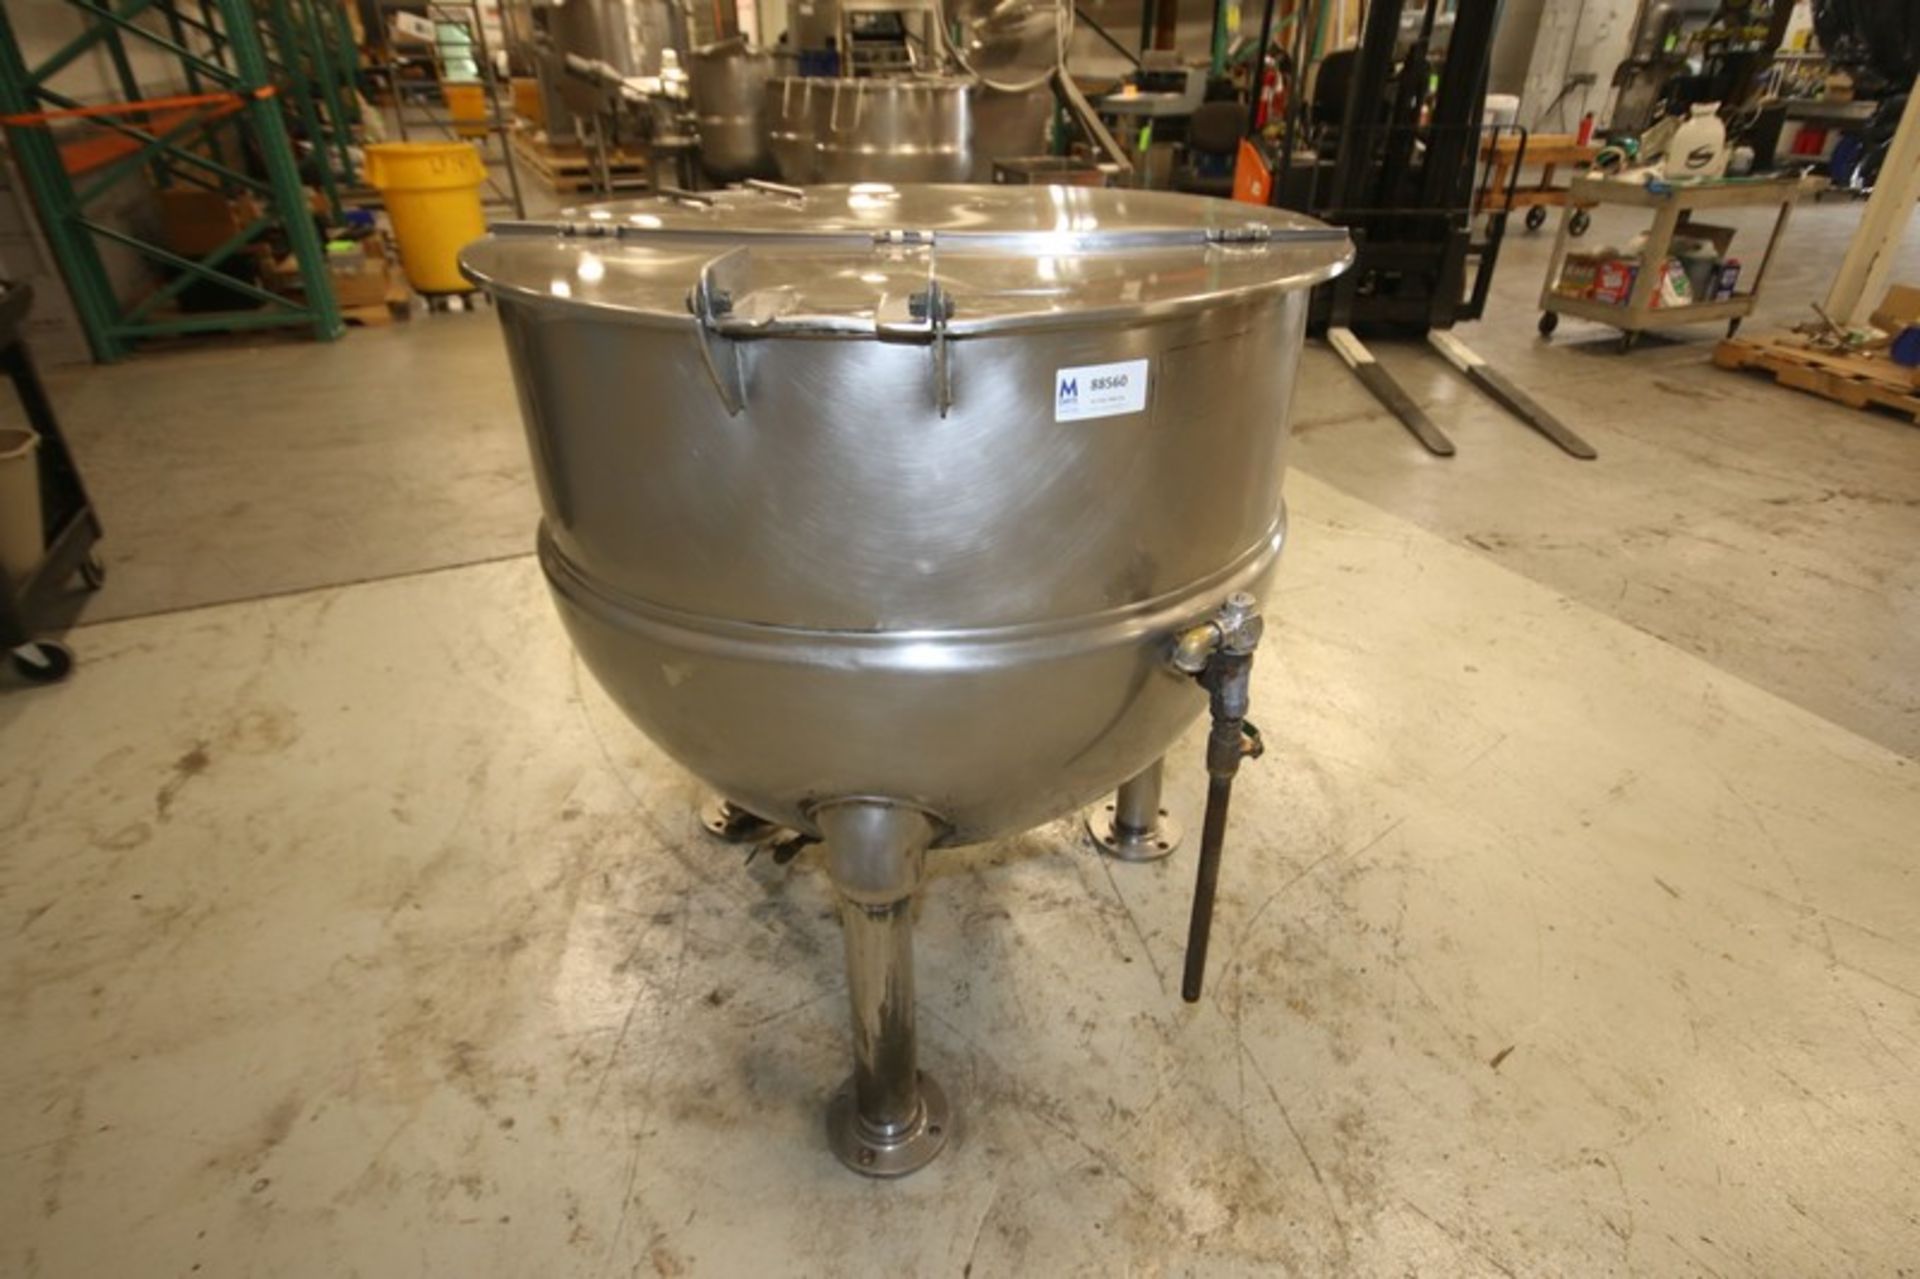 Groen 150 Gallon S/S Jacketed Kettle, Model FT-150 SN 81076-4, with Hinged Lid, 3" Threaded Bottom - Image 5 of 8